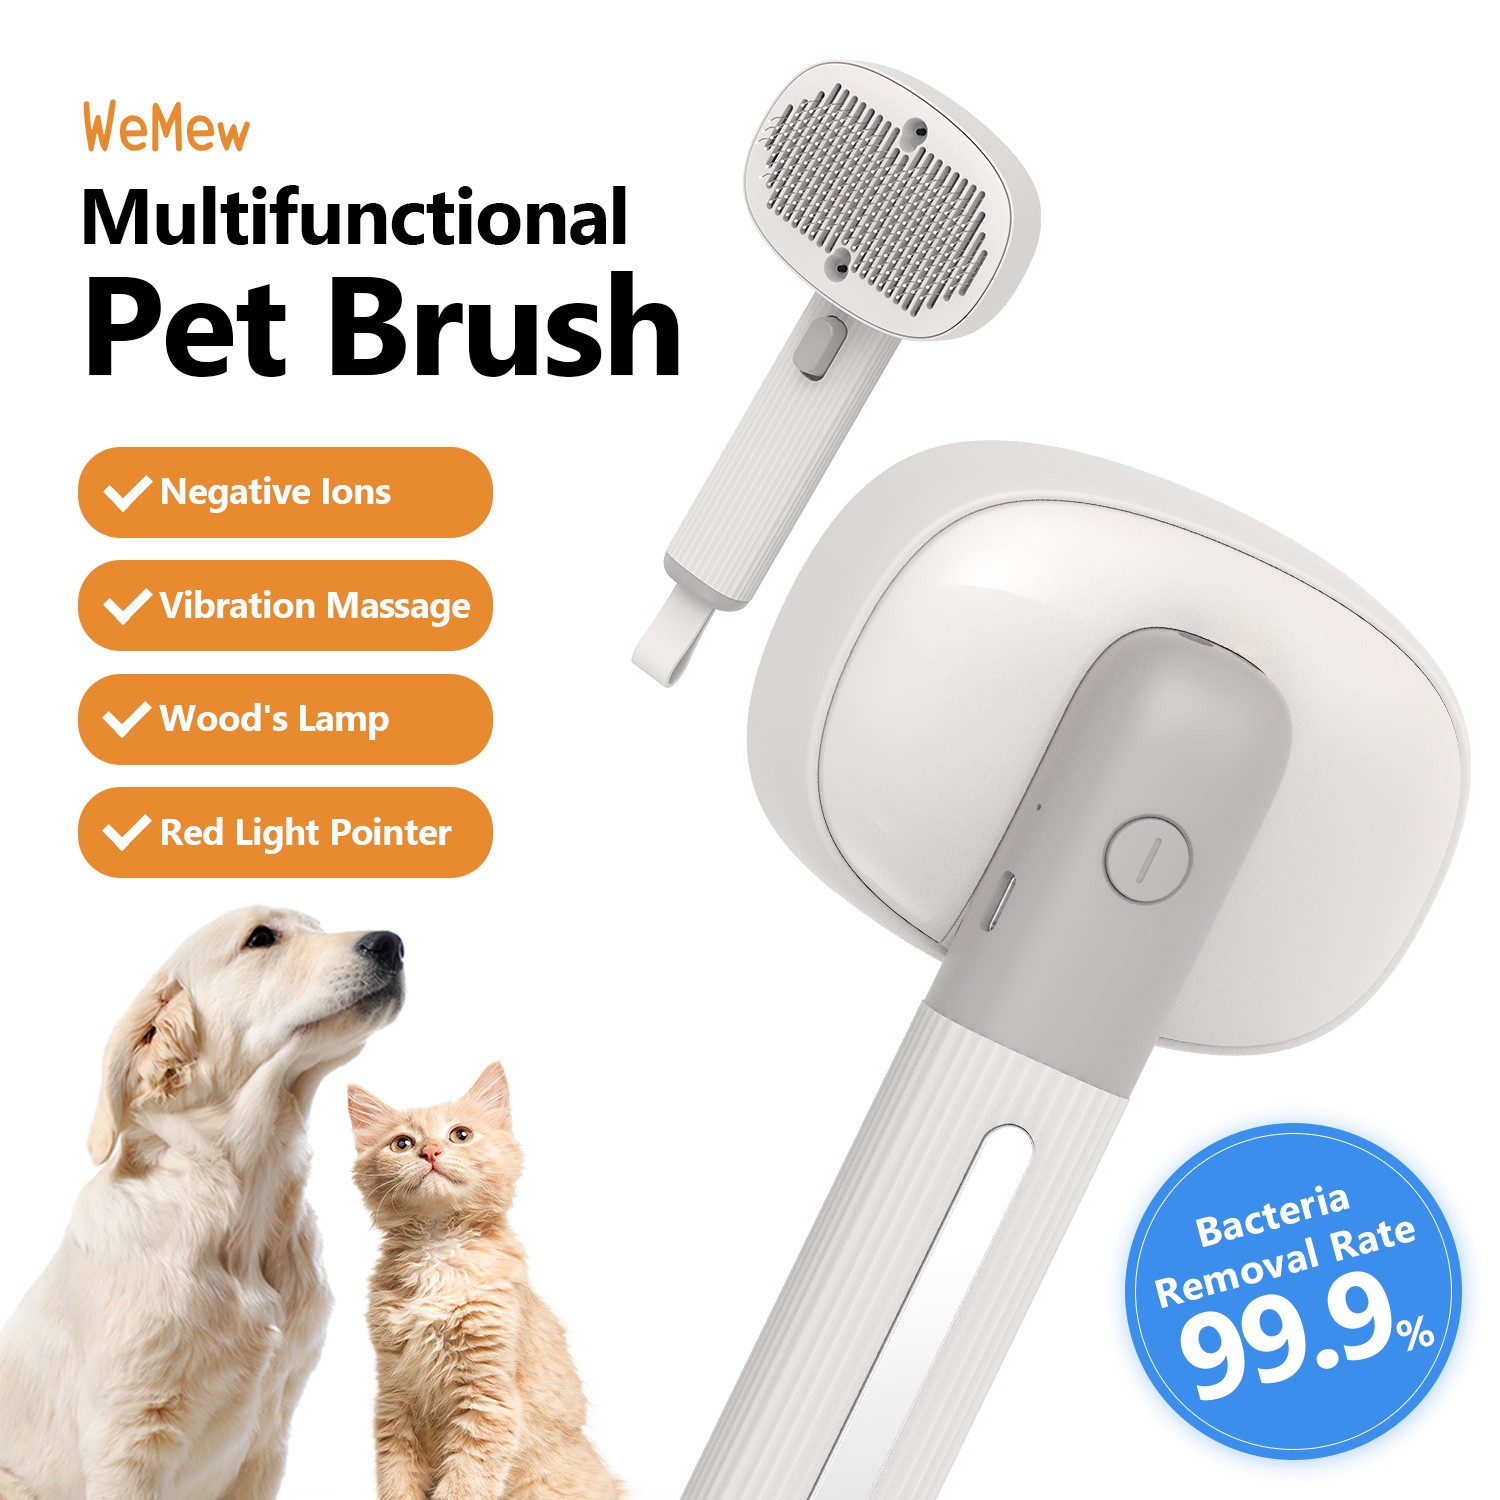 WeMew Self Cleaning Grooming 4 in 1 Multifunctional Pet Brush for Dogs and Cats  (with Negative Ion, Vibration Massage, UVA Wood's Lamp, Red Light Laser Pointer)